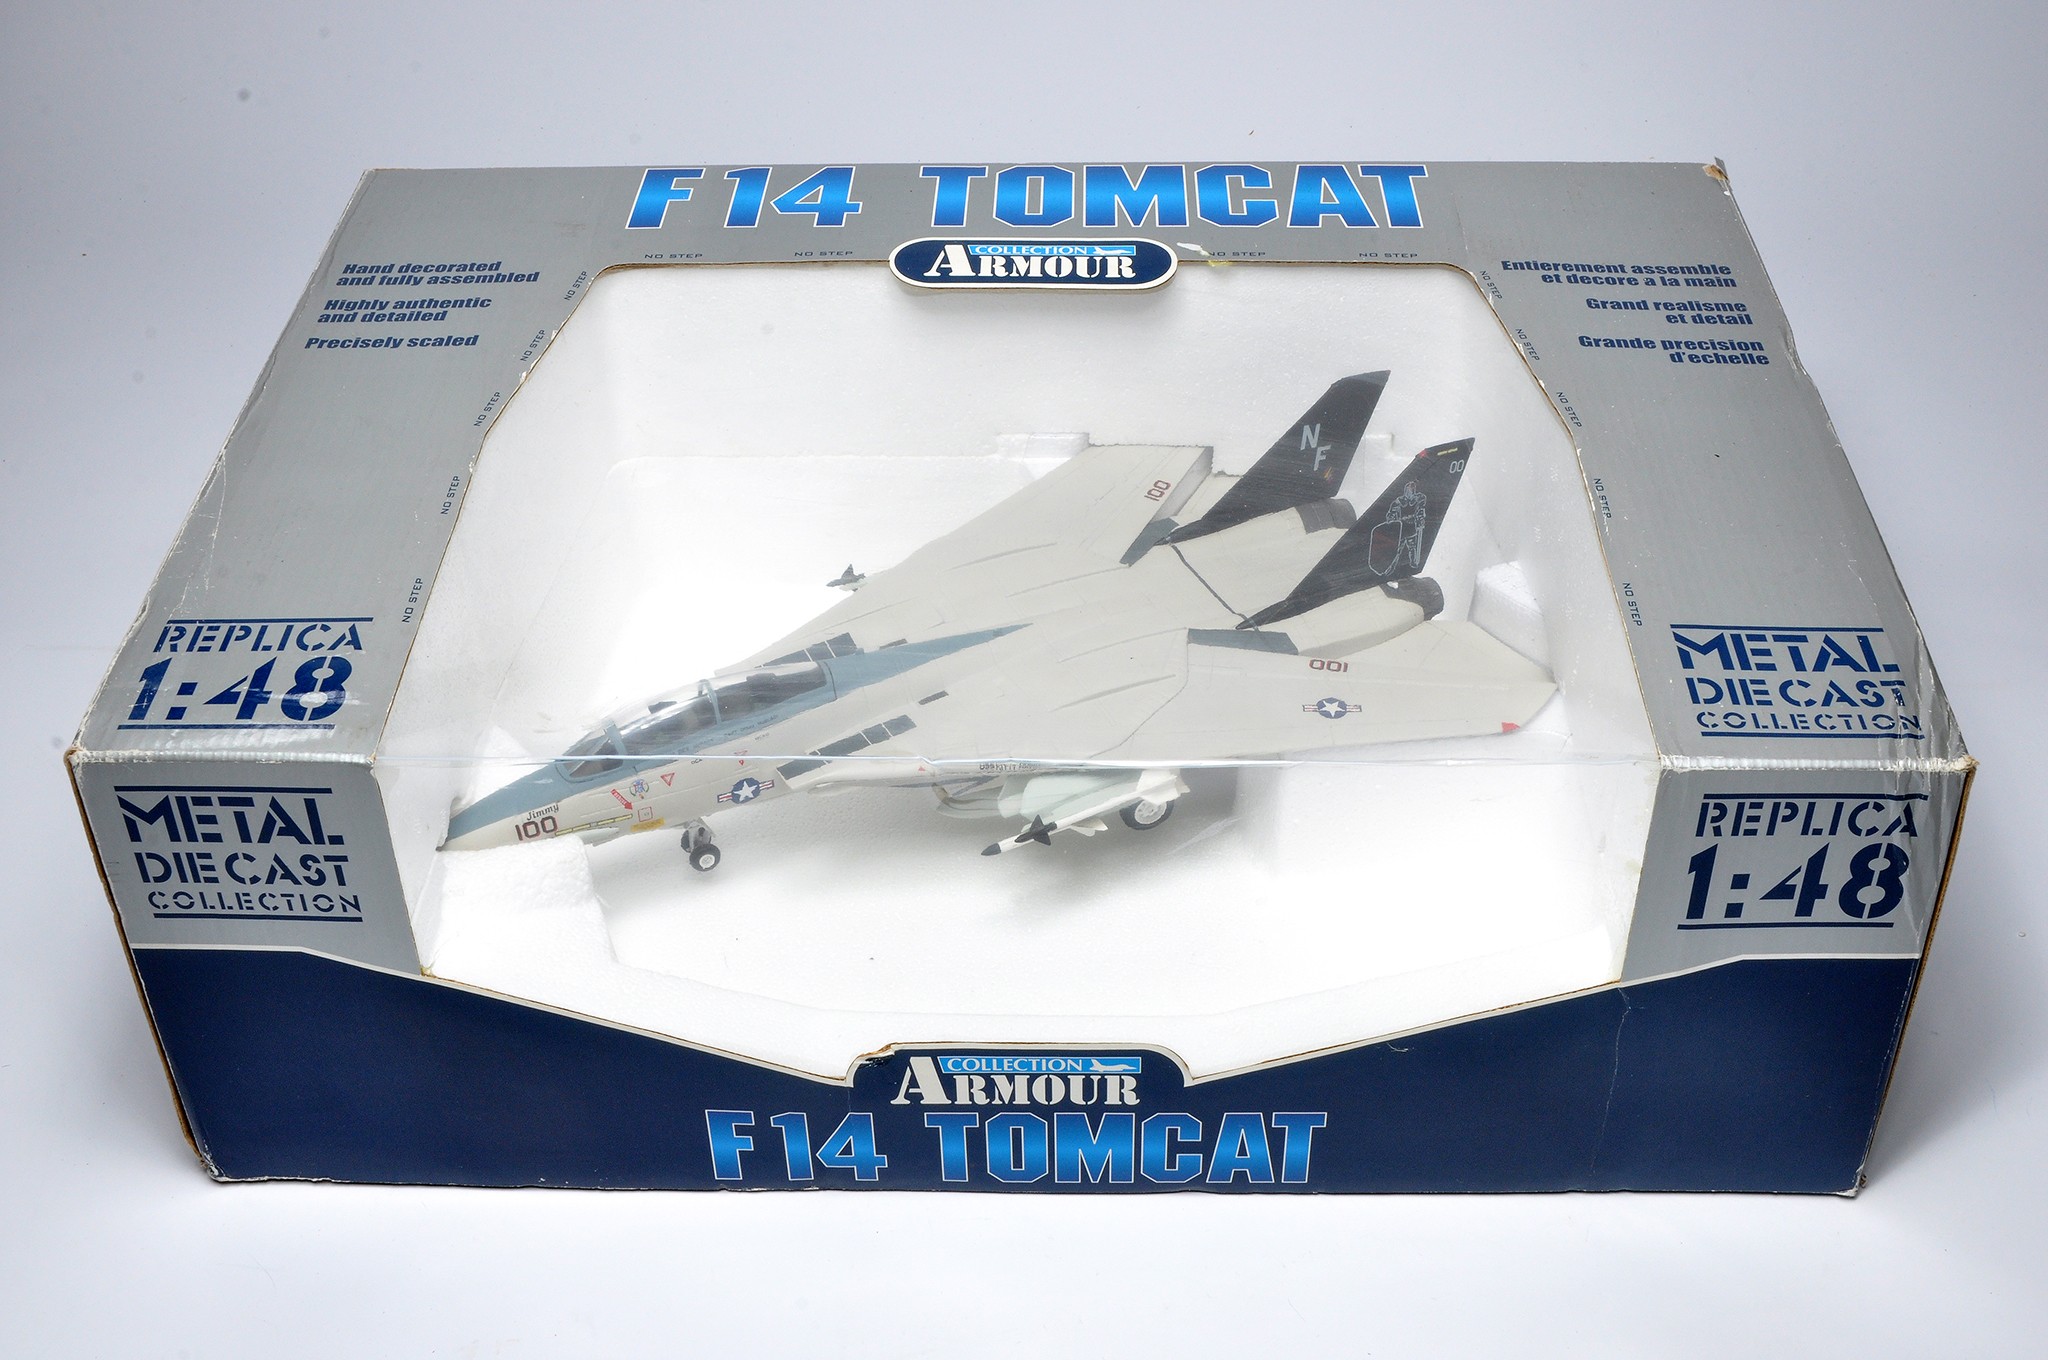 Franklin Mint 1/48 diecast model aircraft issue comprising No. 98069 F14 Tomcat. Looks to be